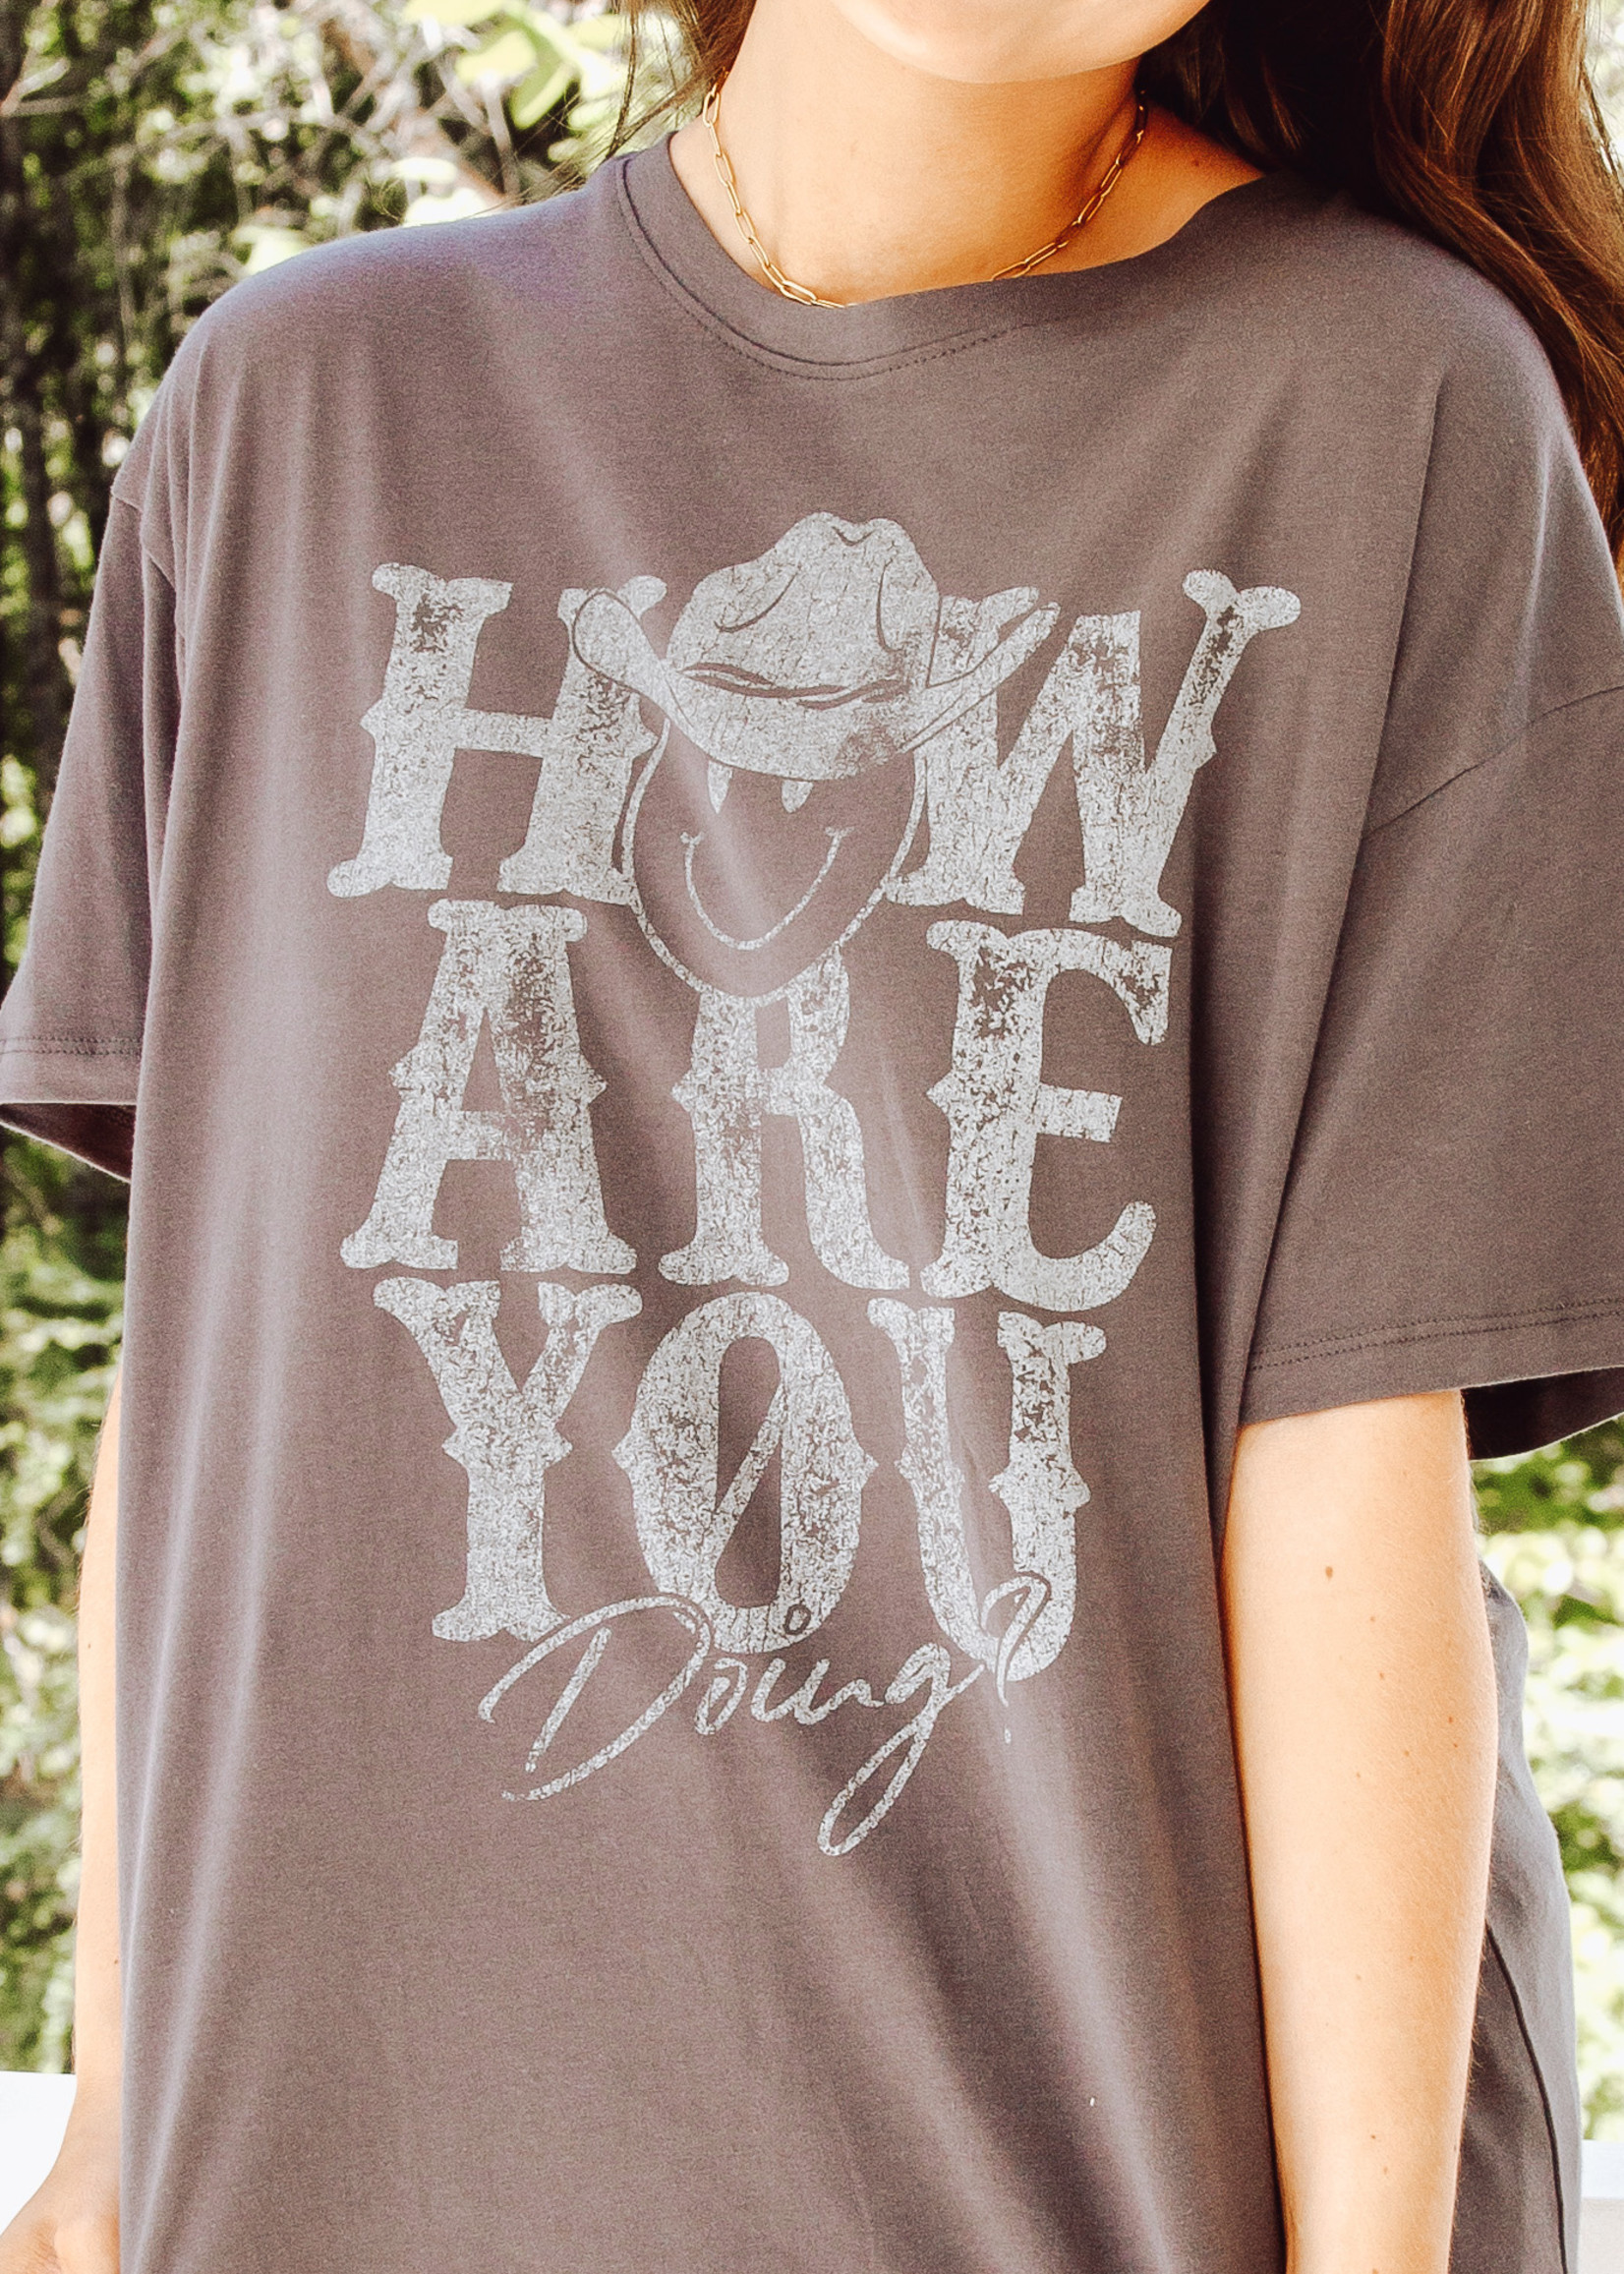 How Are You Graphic Tee